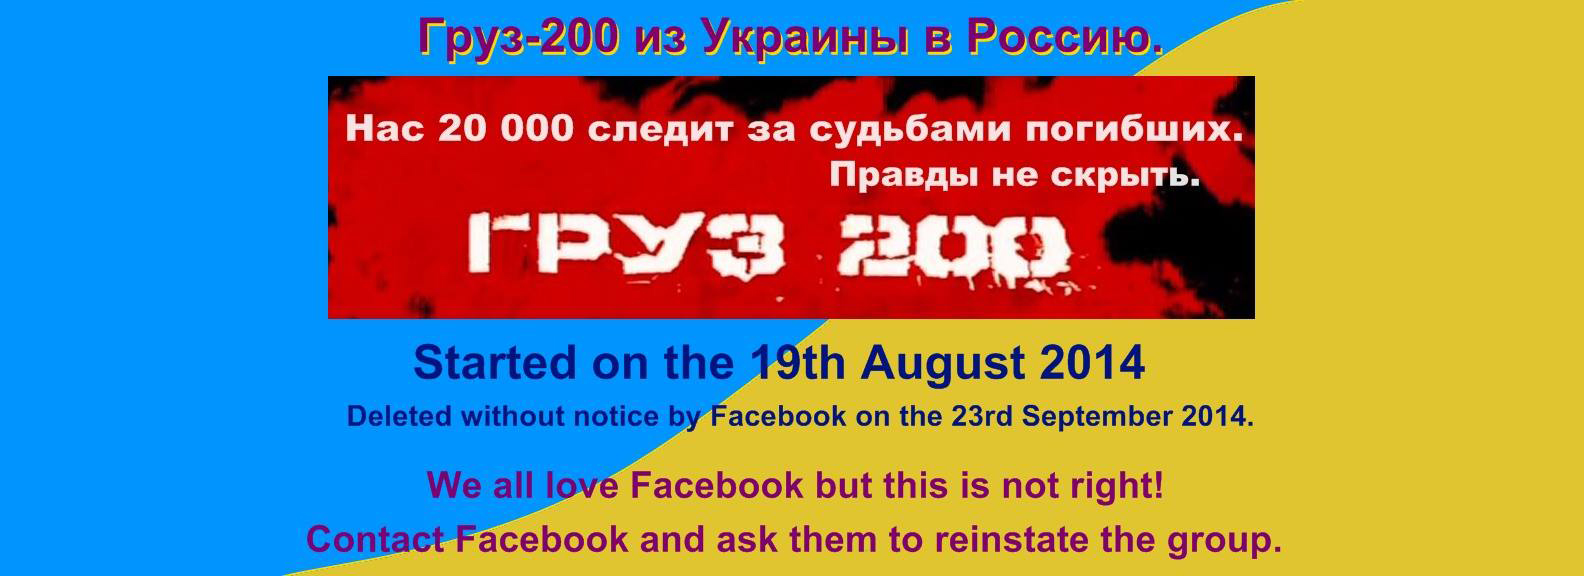 FB group Cargo 200 exposing Russian soldiers KIA in Ukraine shut down for a day, renewed after social media activism